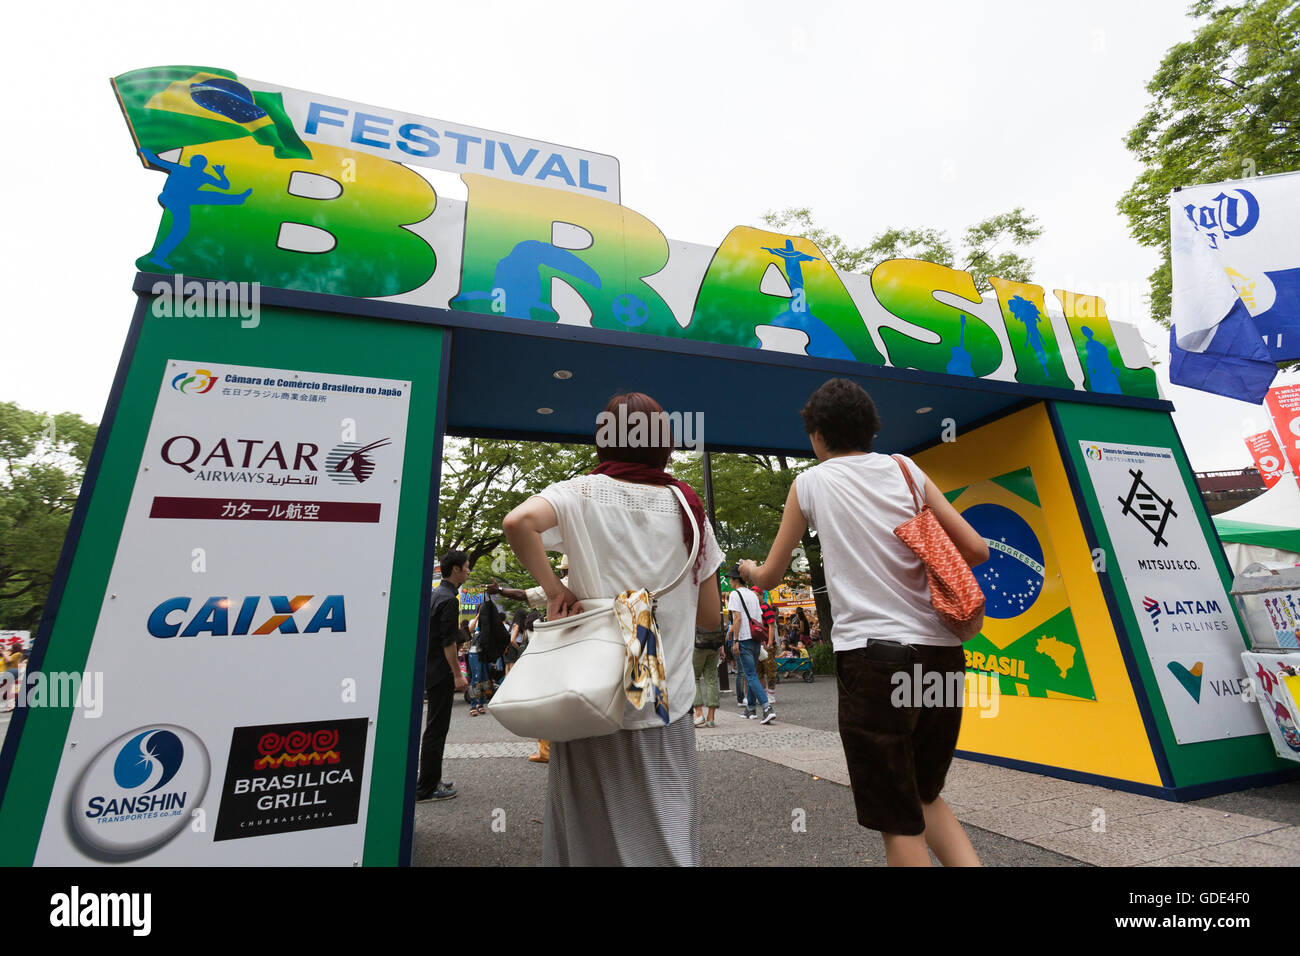 Tokyo, Japan. 16th July, 2016. Visitors enter to the Festival Brasil 2016 at Yoyogi Park on July 16, 2016, Tokyo, Japan. The annual festival brings together Brazilian food and entertainment including Samba and Capoeira performers. Organized by the Camara de Comercio Brasileira no Japao the event runs until July 17. The Brazilian community is the third largest immigrant population in Japan. Credit:  Rodrigo Reyes Marin/AFLO/Alamy Live News Stock Photo